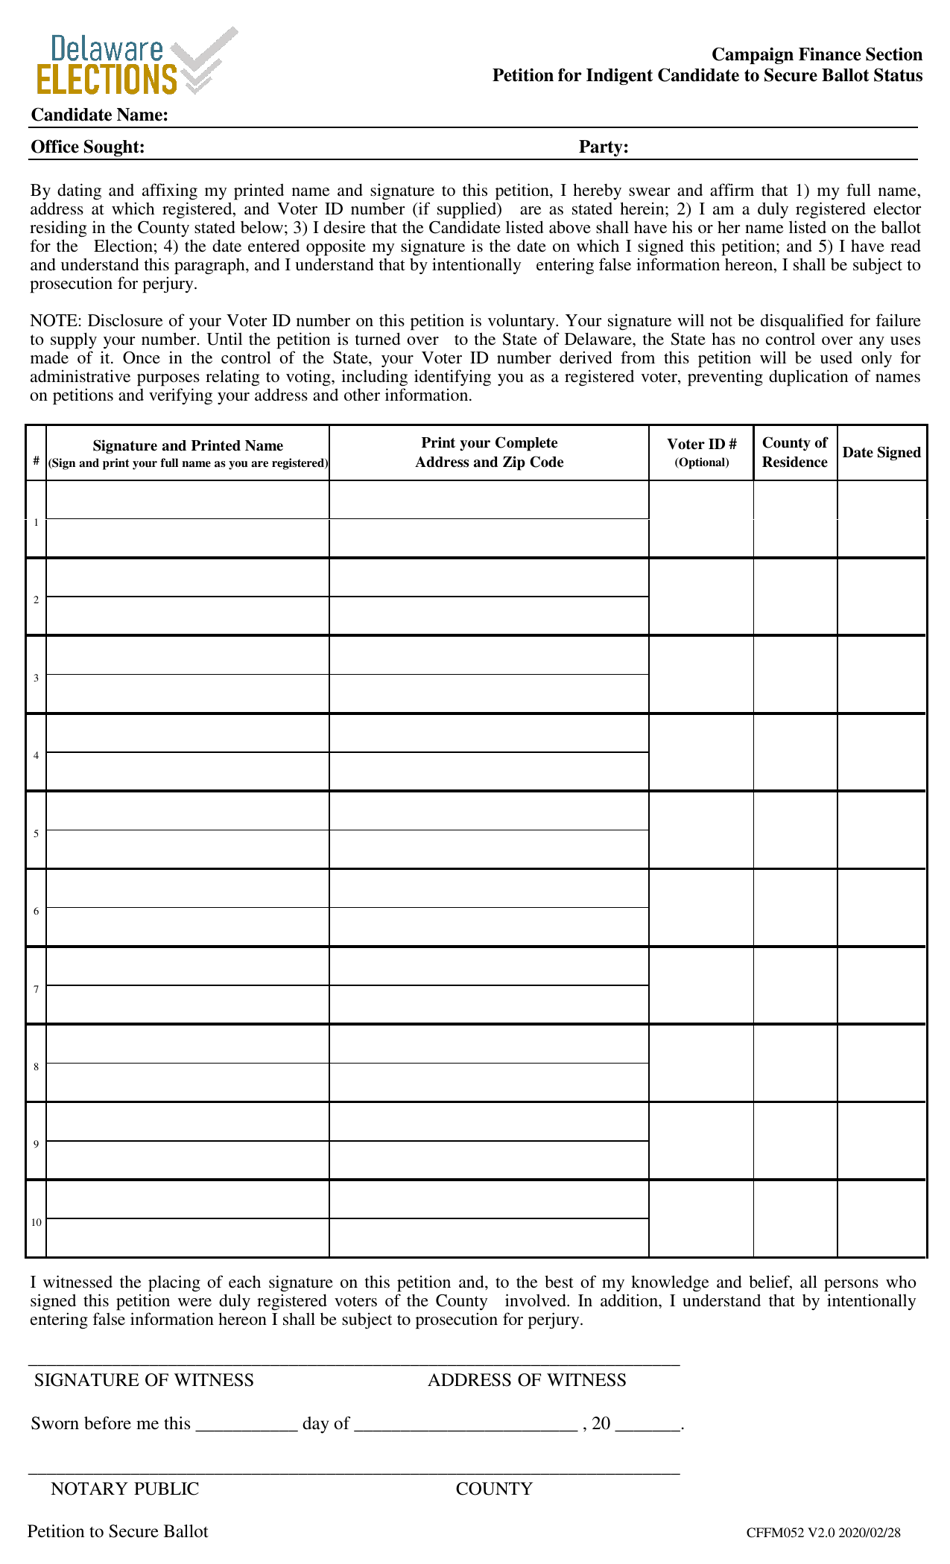 Form CFFM052 Petition for Indigent Candidate to Secure Ballot Status - Delaware, Page 1